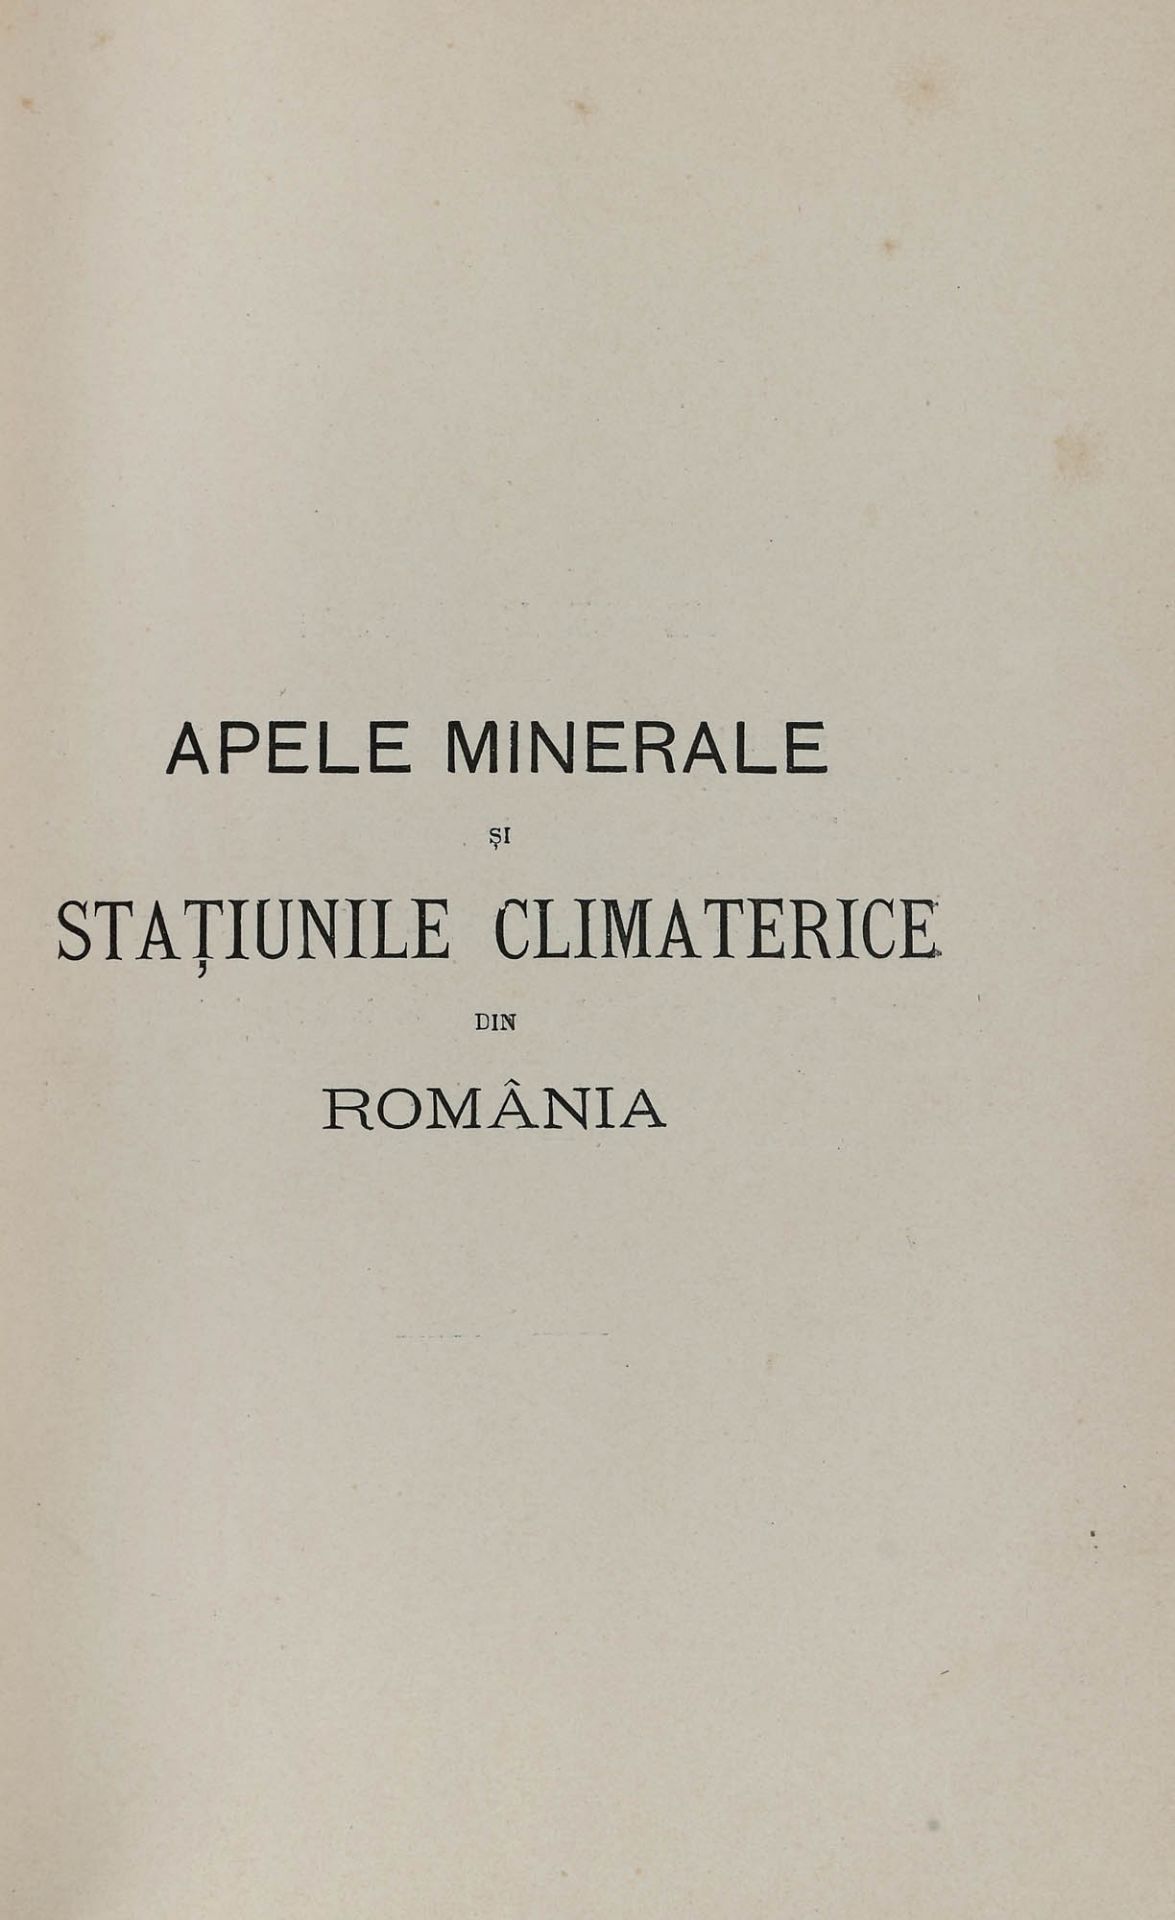 "Apele minerale și stațiunile climaterice din România" ("Mineral waters and climatic resorts in R - Image 3 of 5